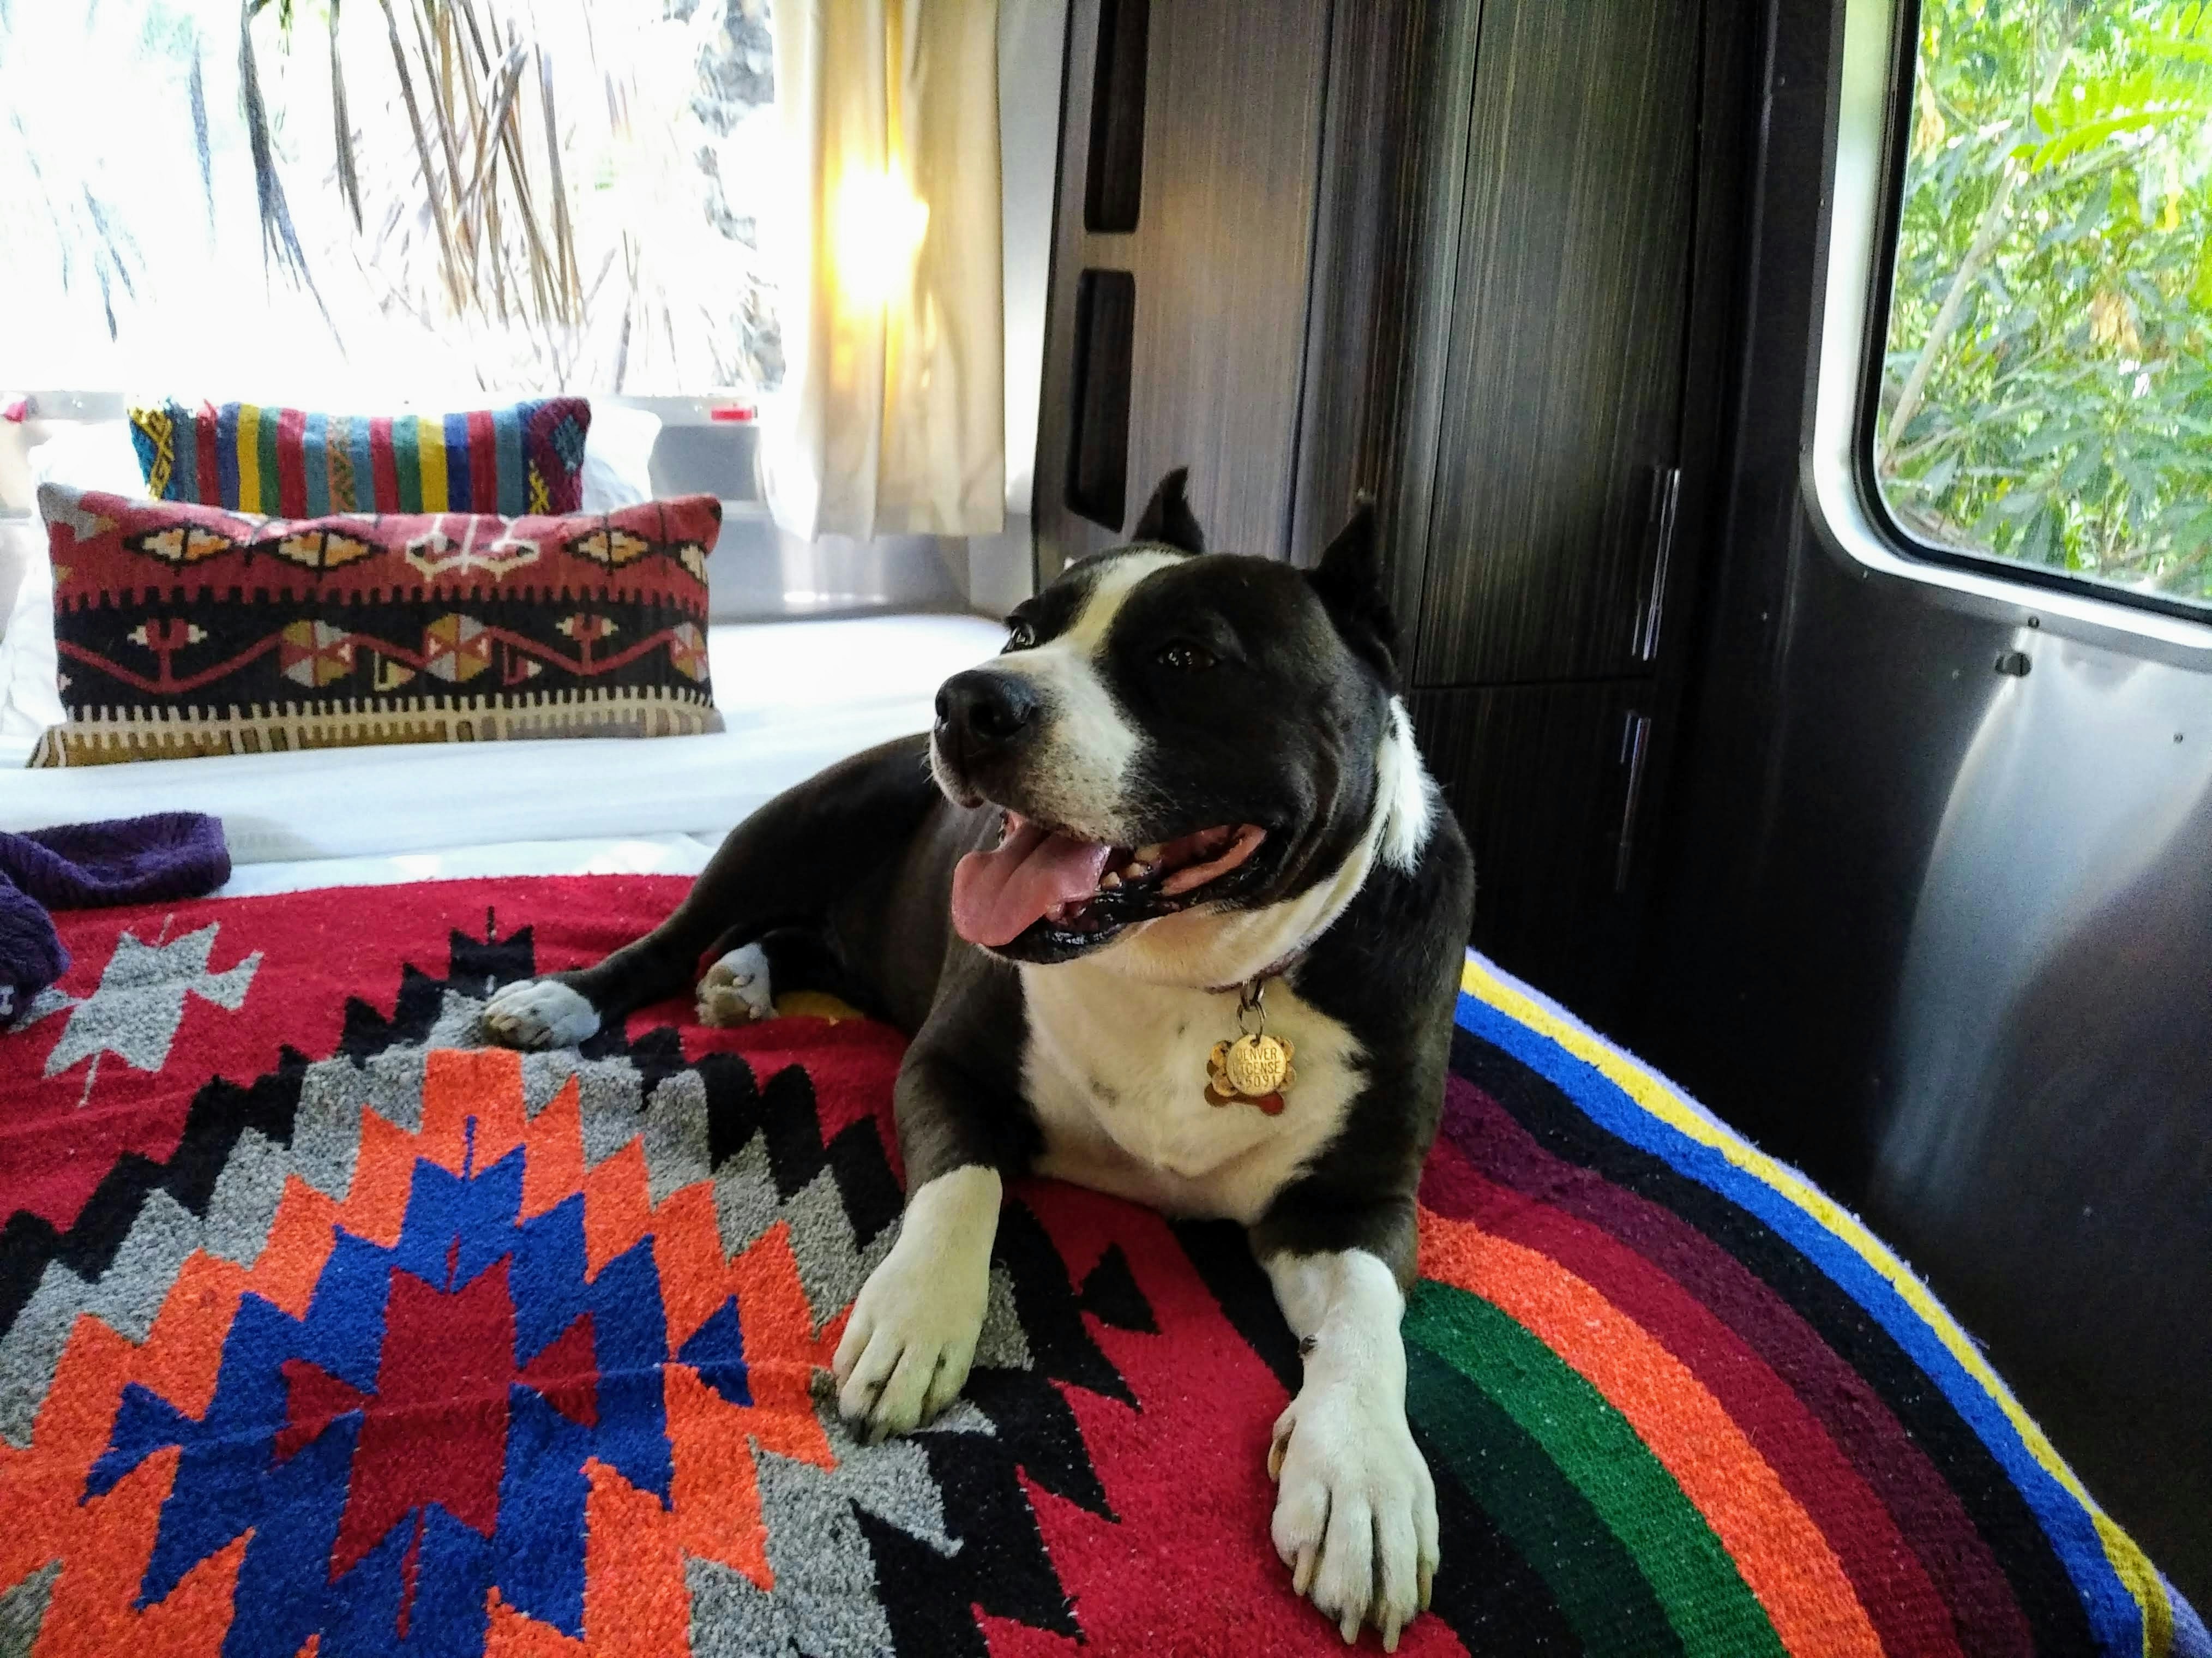 A handsome black and white dog smiles as he lolls on a bed covered in a bright, primary-hued Pendleton blanket with a geometric, southwestern design. Behind the dog are crisp white sheets and two pillows that coordinate, but do not match, the blanket. Outside the silver door of the Airstream trailer in which the photo is taken are green trees and palms.